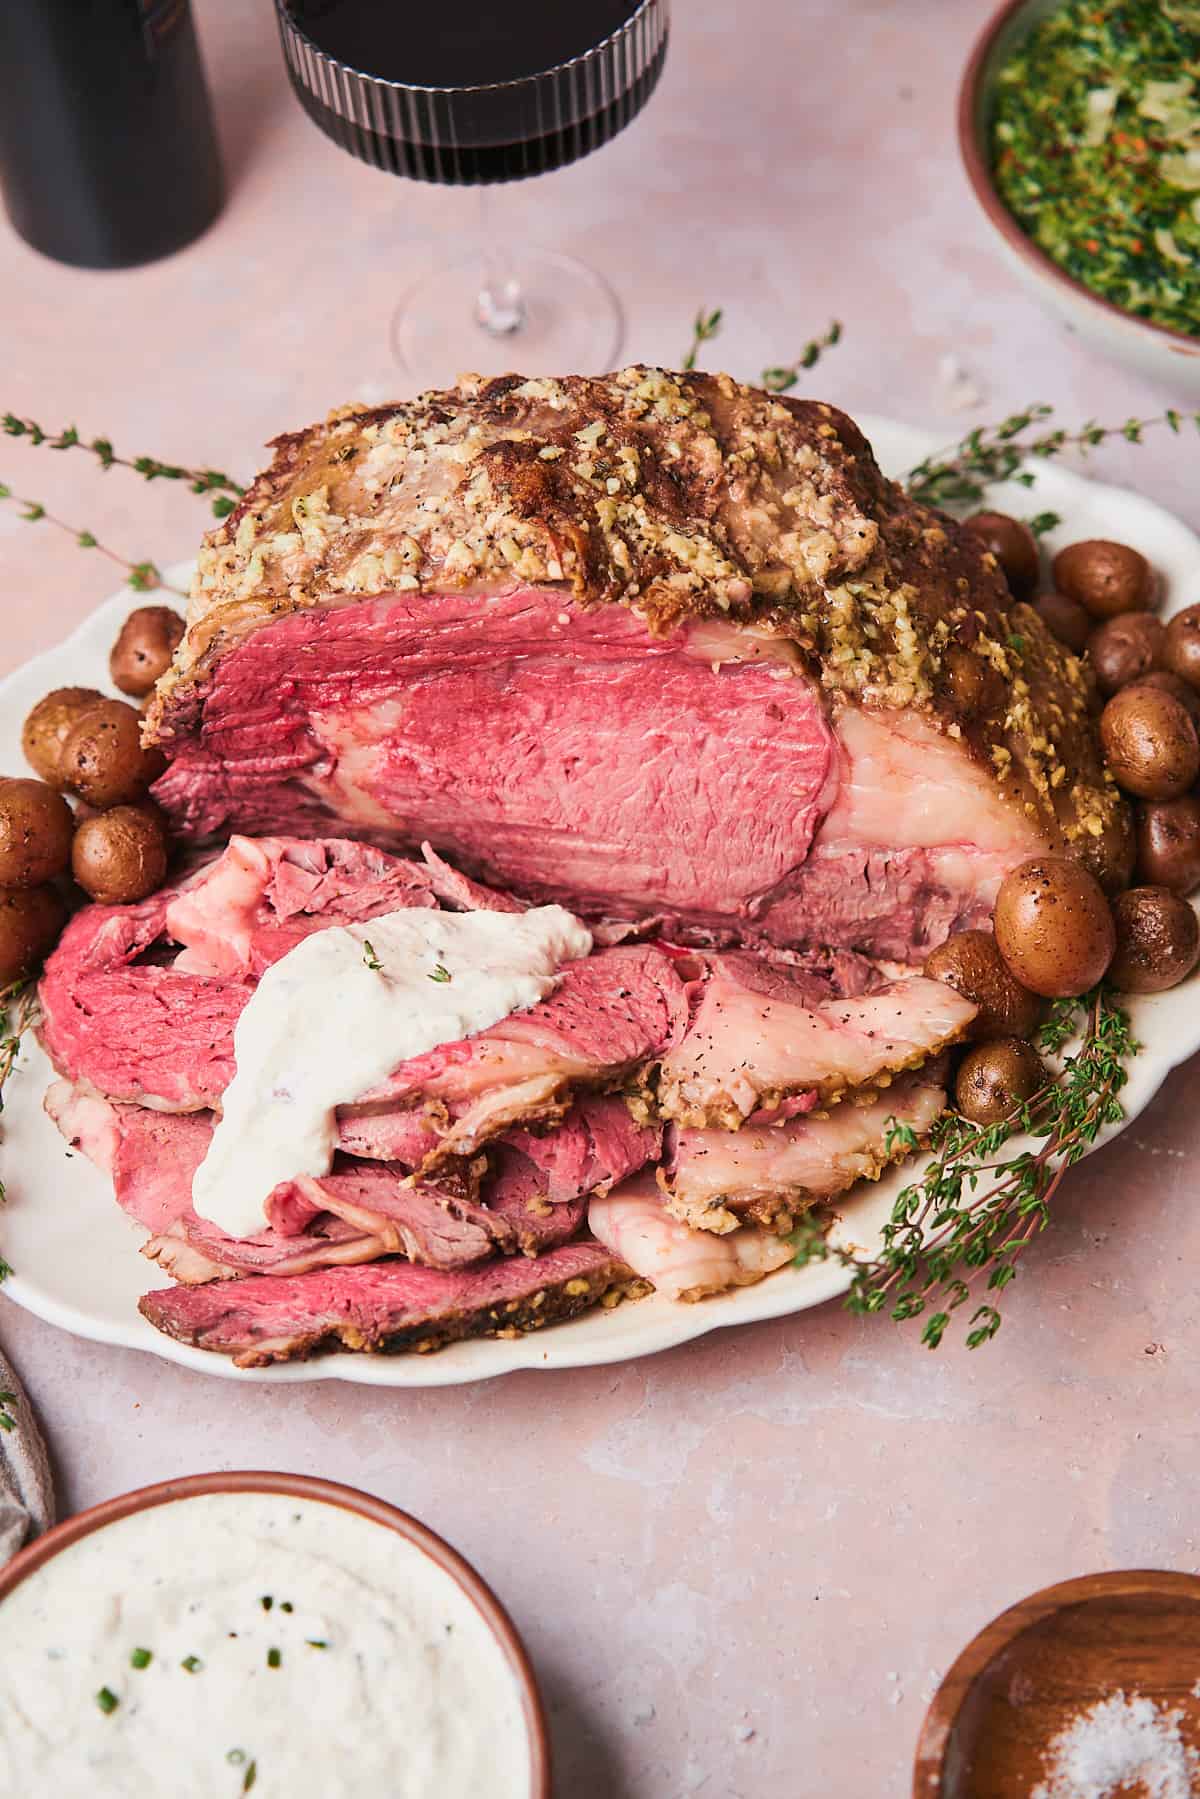 Cooked prime rib on plate and with some thin slices cut away from the roast, with creamy horseradish sauce covering the slices. 